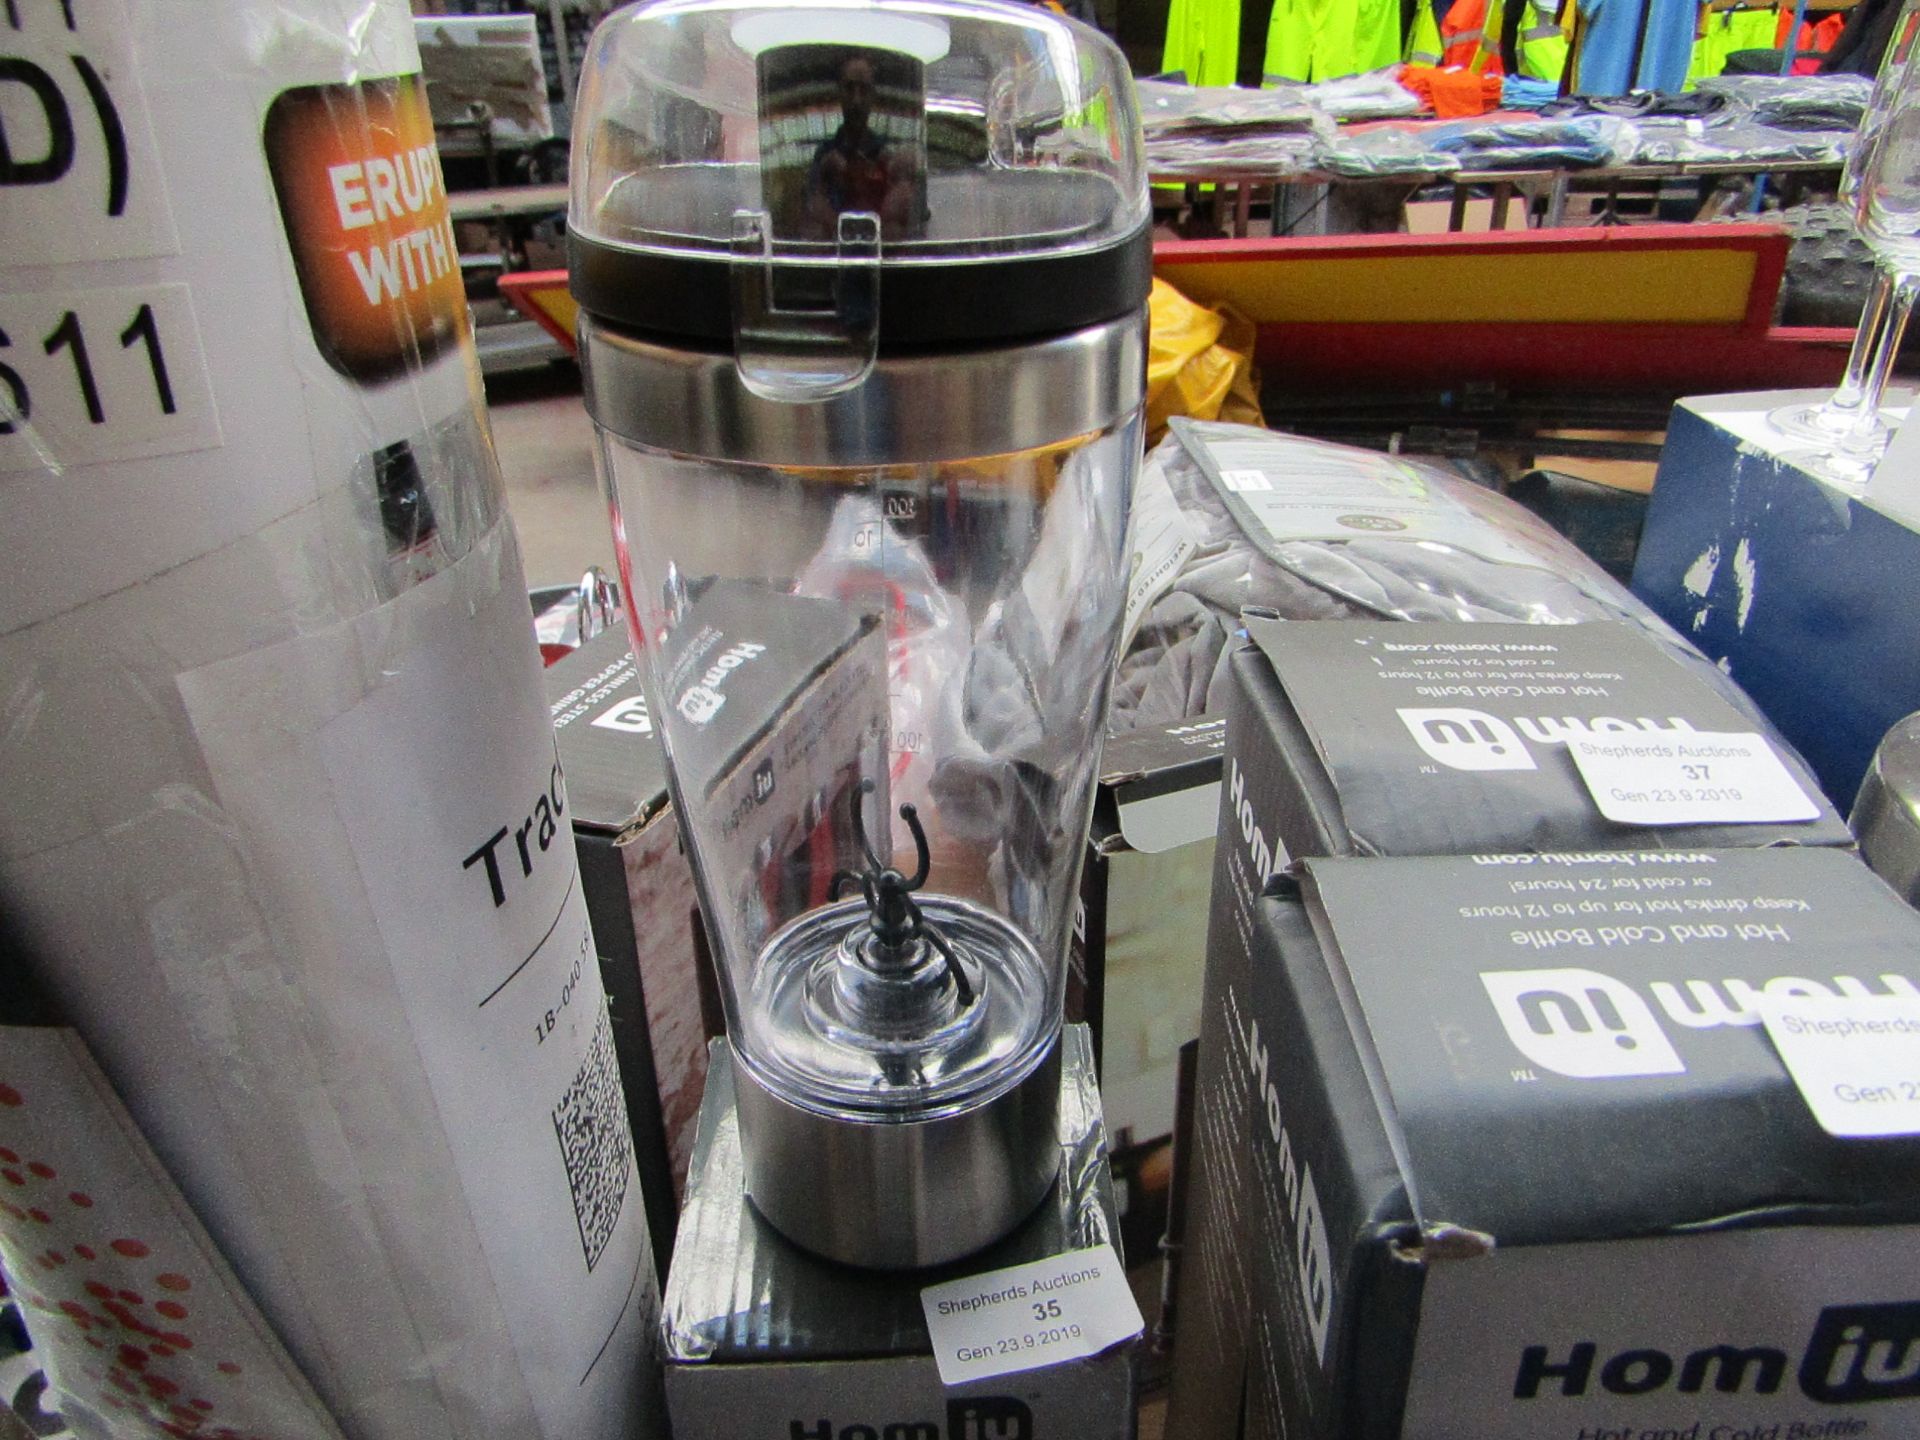 Electric protein mixer, untested and boxed.